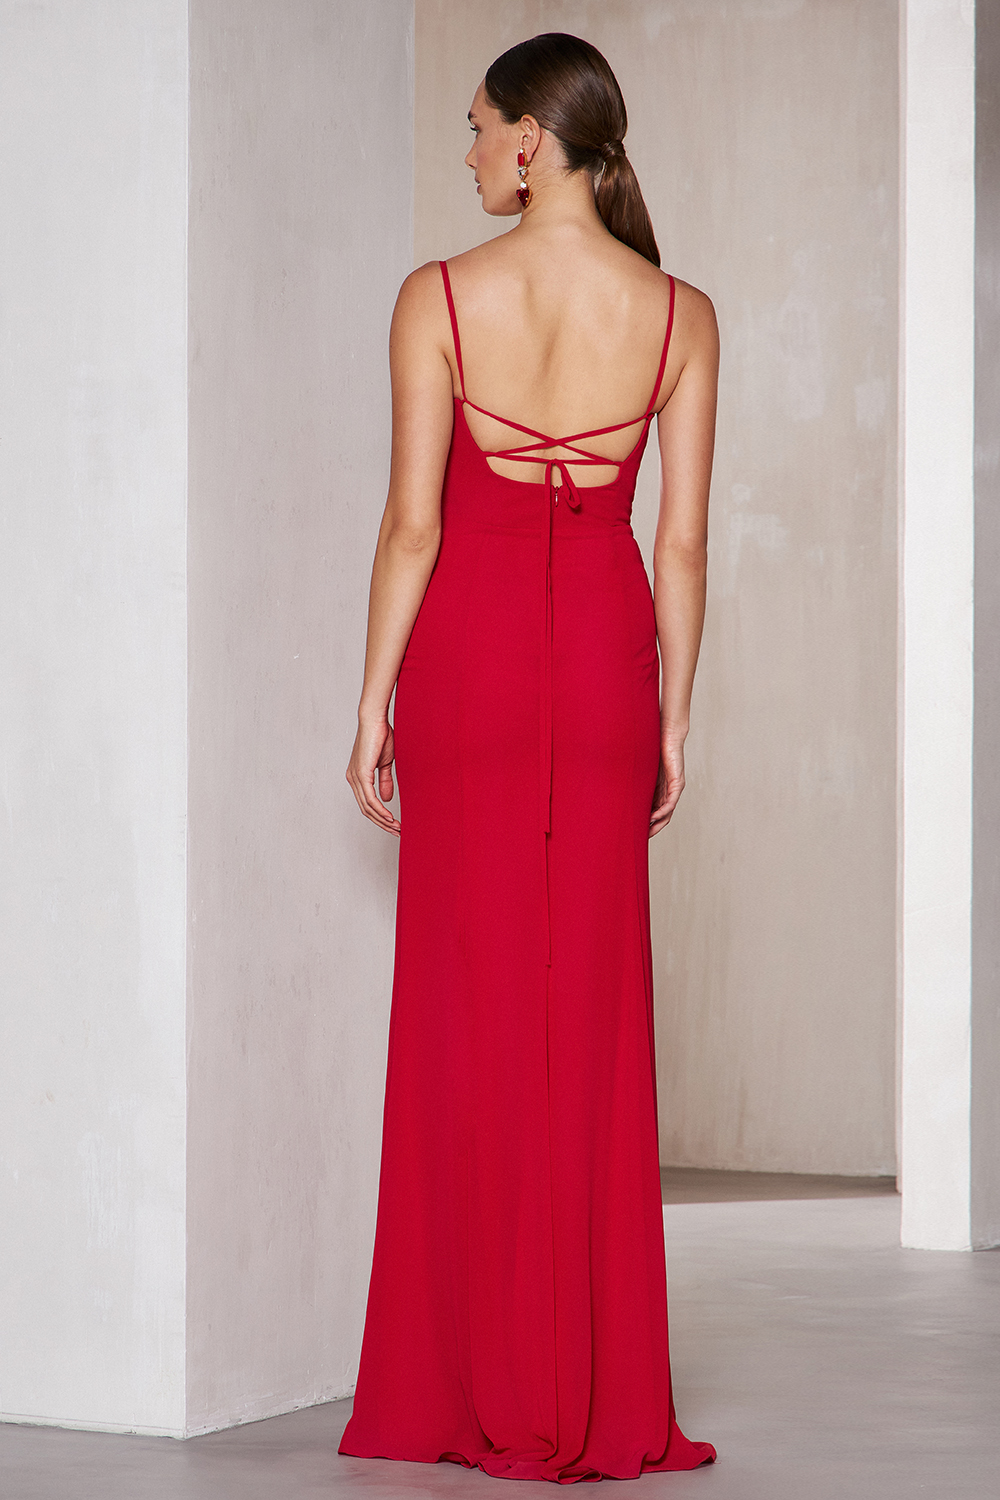 Cocktail Dresses / Long cocktail chiffon dress with open back and opening